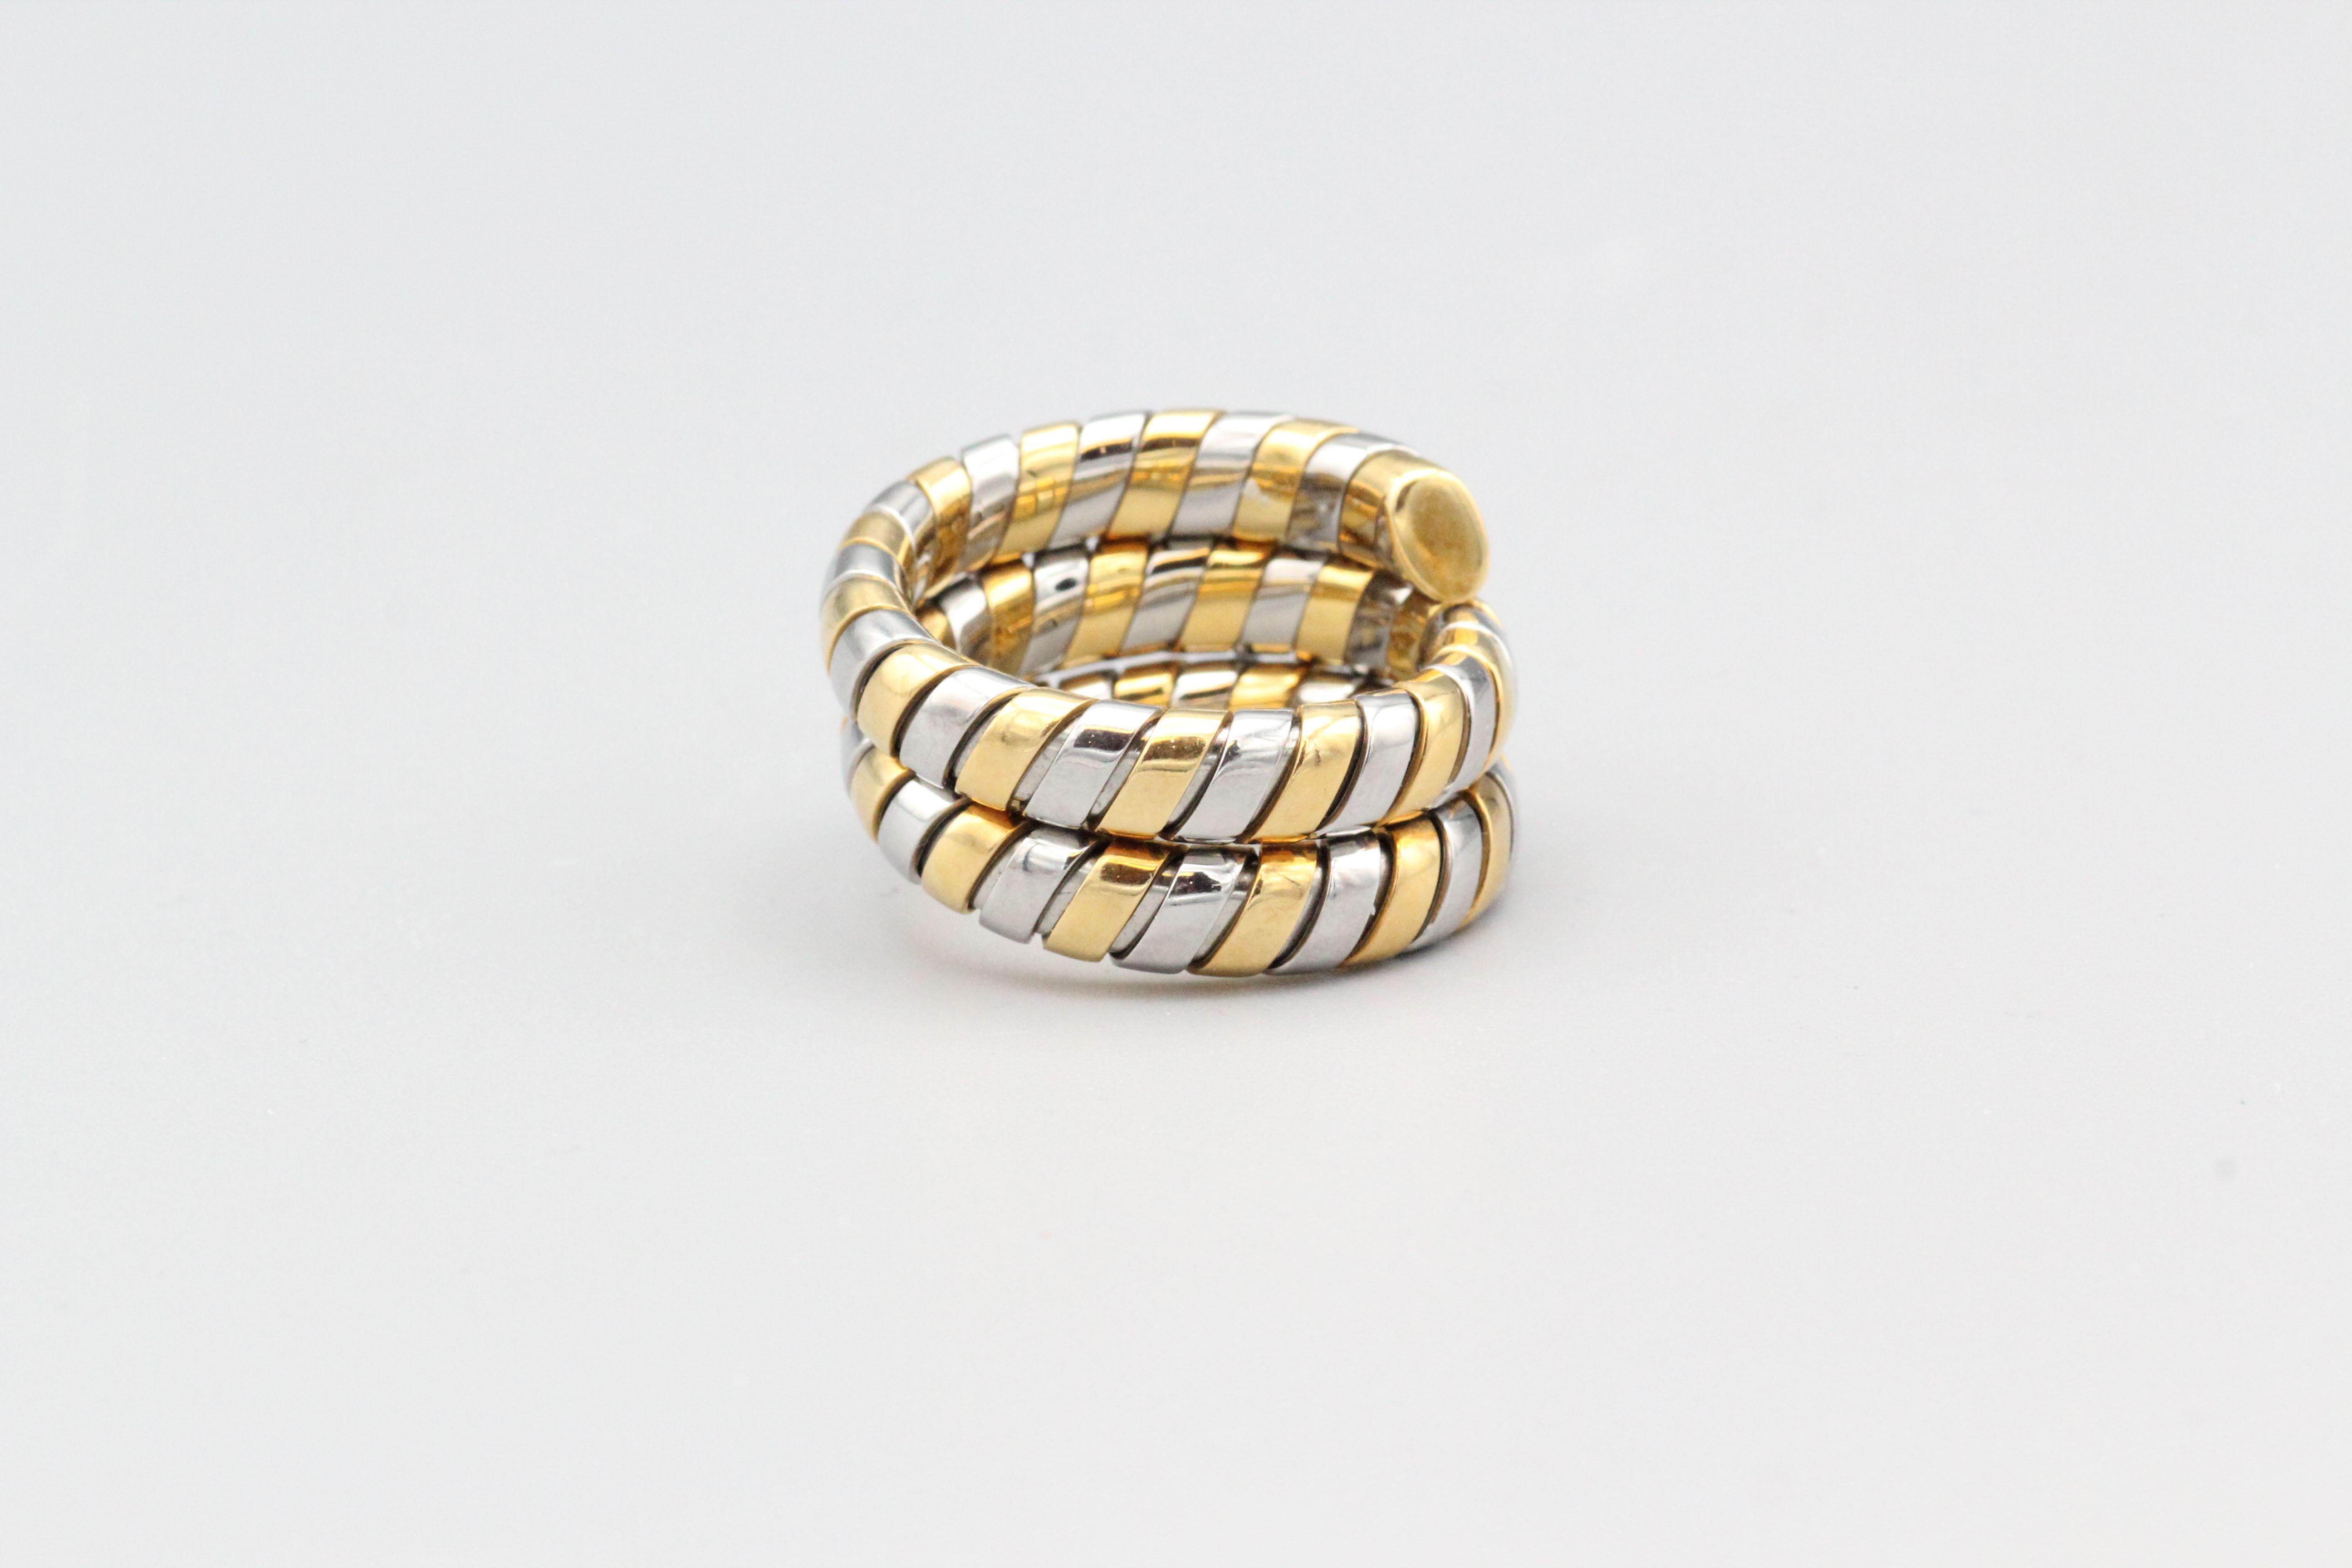 Bulgari Tubogas Steel and 18k Gold Flexible Snake Ring Size 6 In Good Condition For Sale In Bellmore, NY